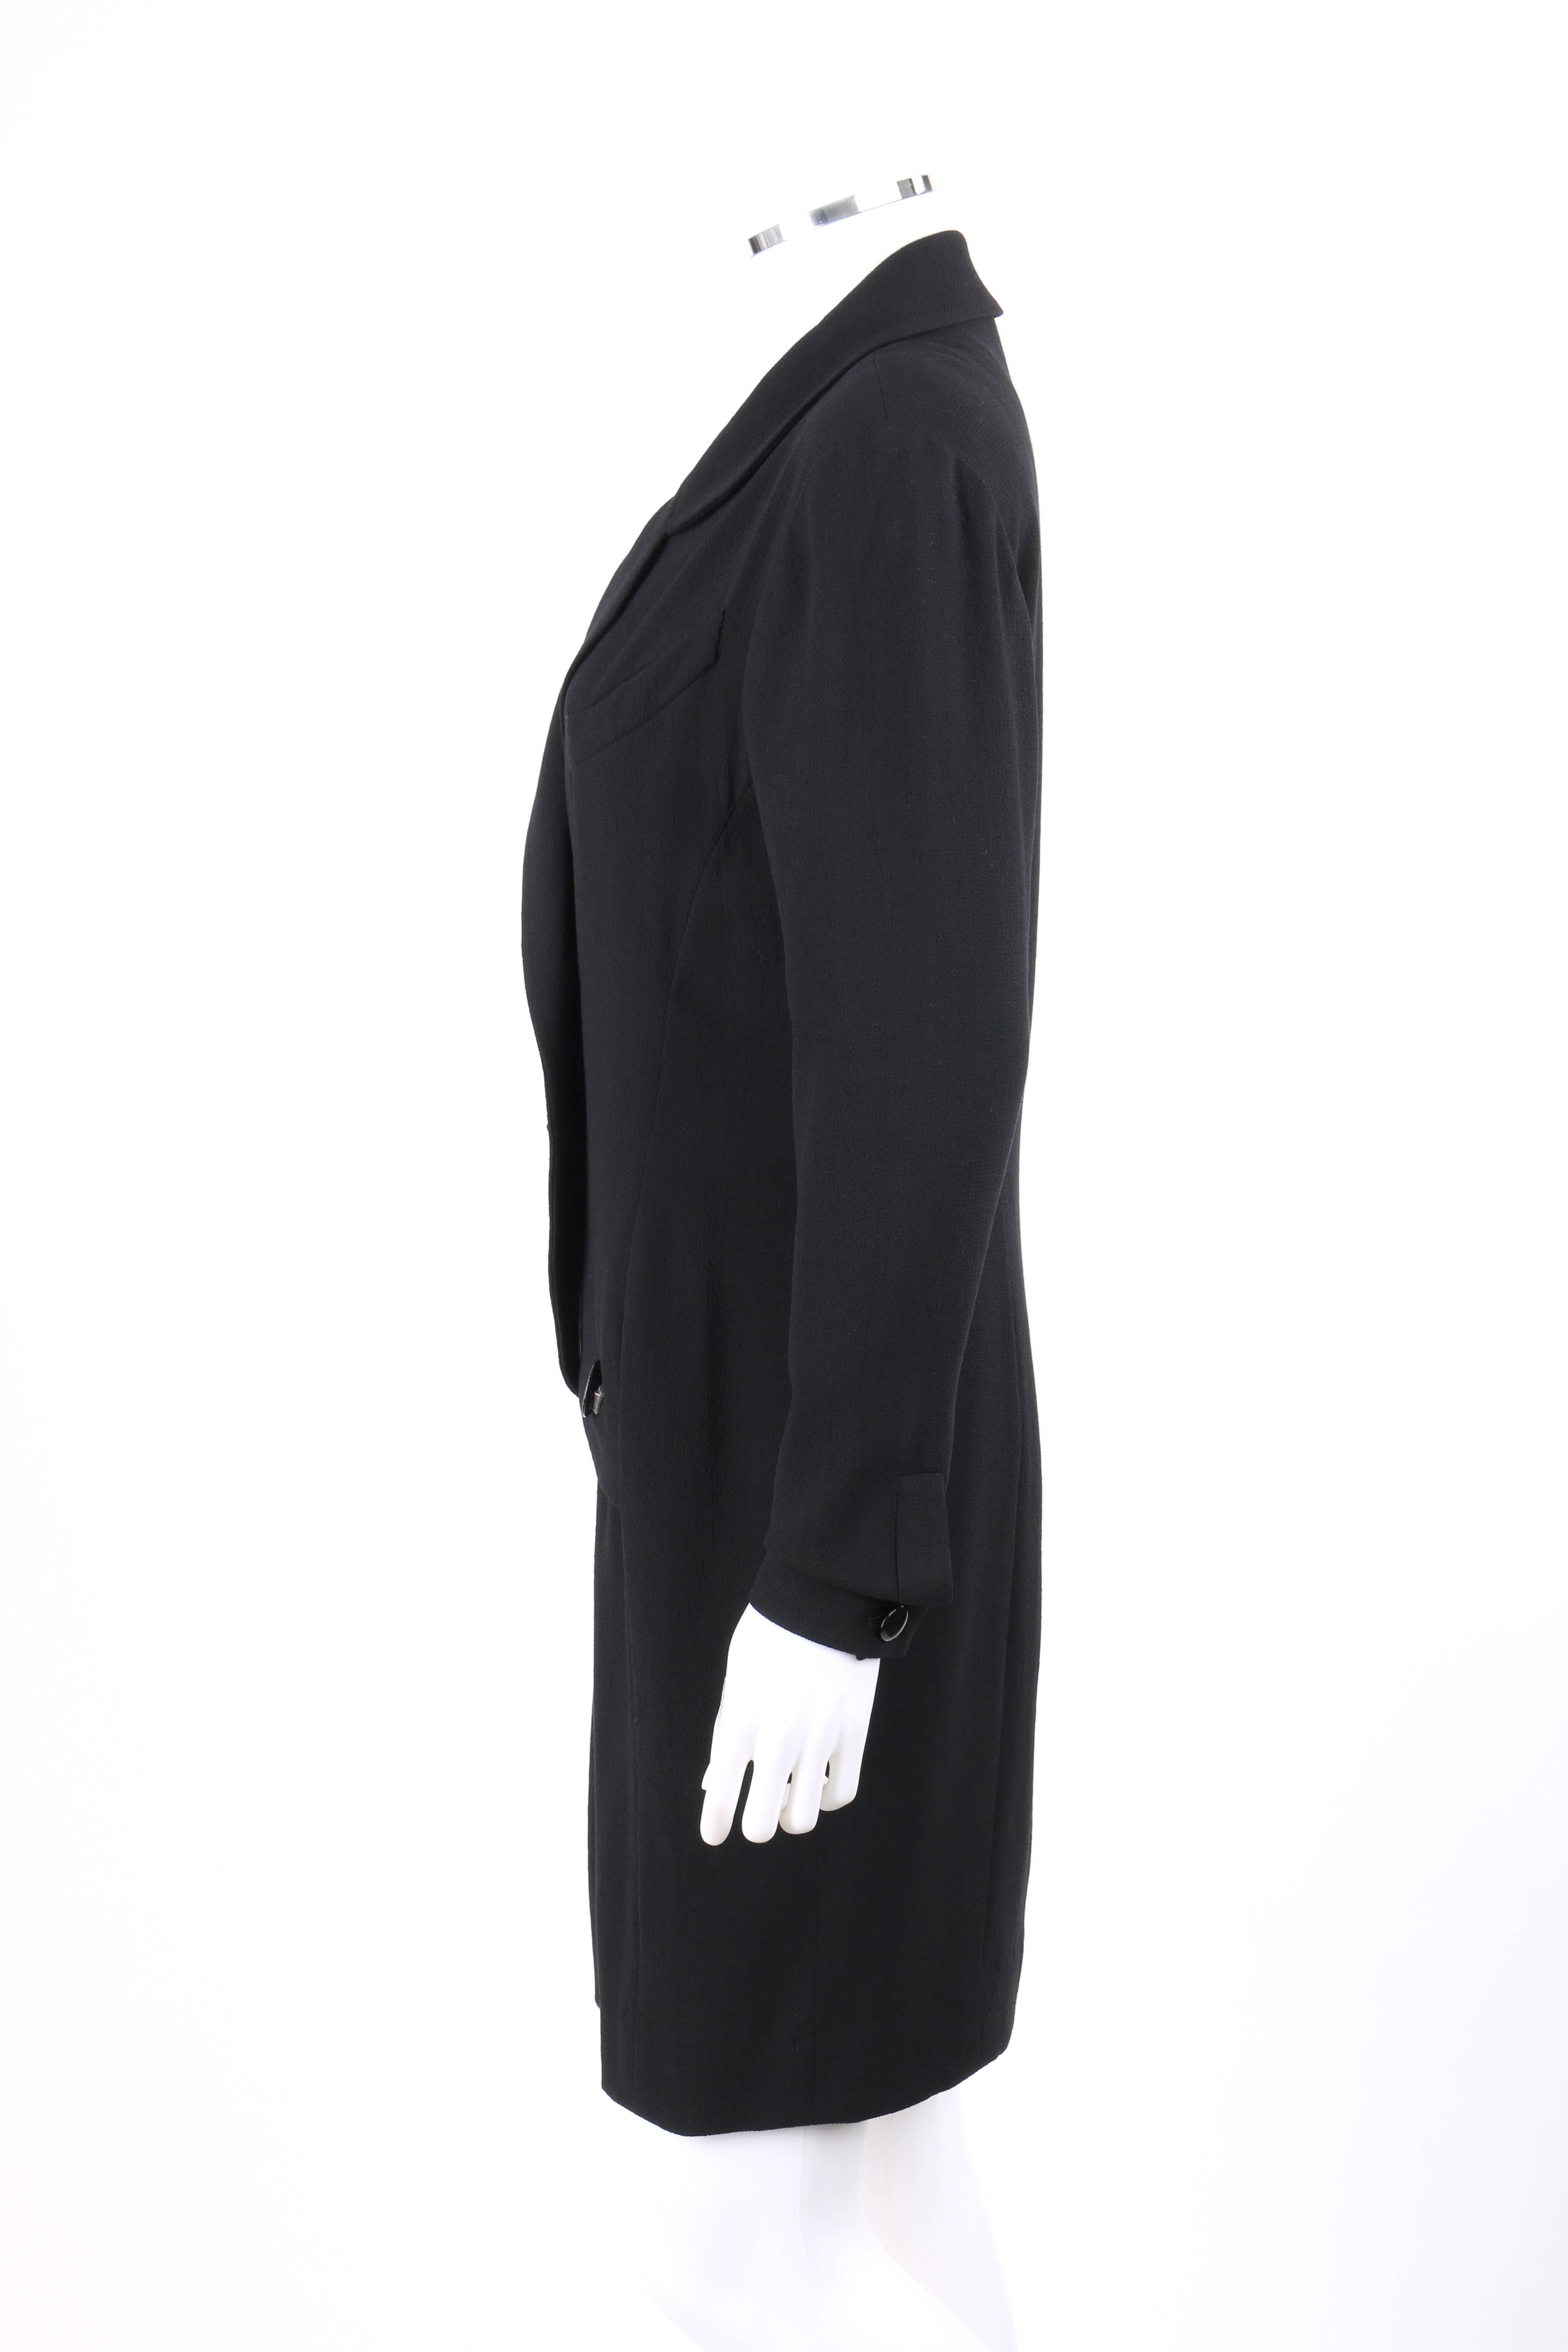 CHANEL Boutique c.1980's Black Wool Crepe Double Breasted One Piece Dress Suit 1